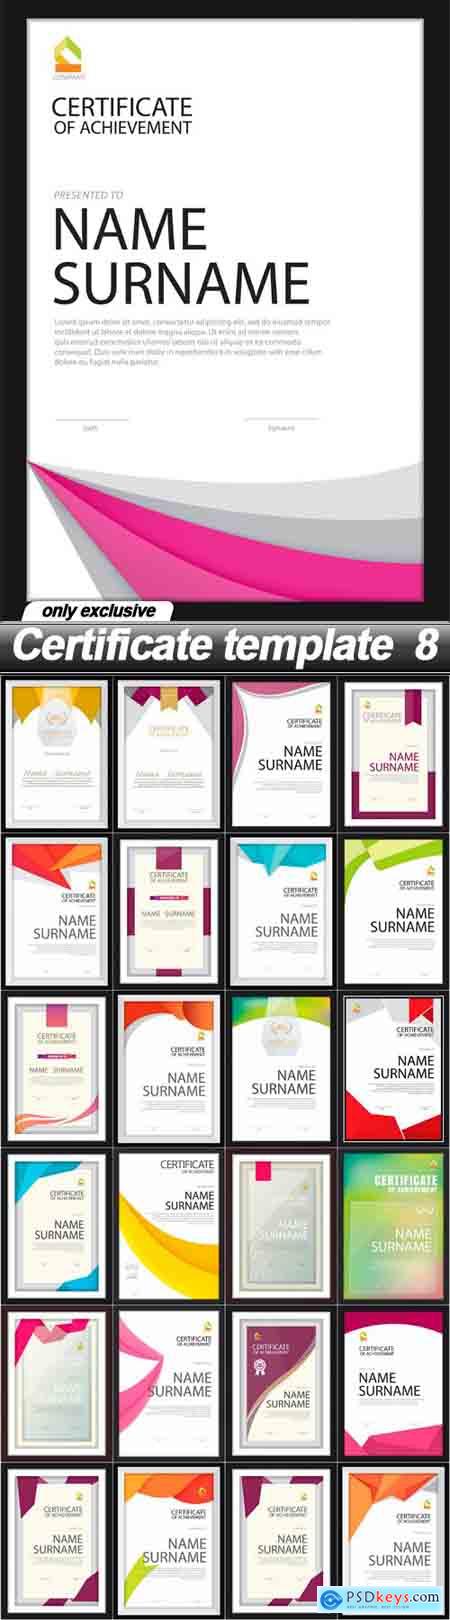 Certificate template 8 - 25 EPS